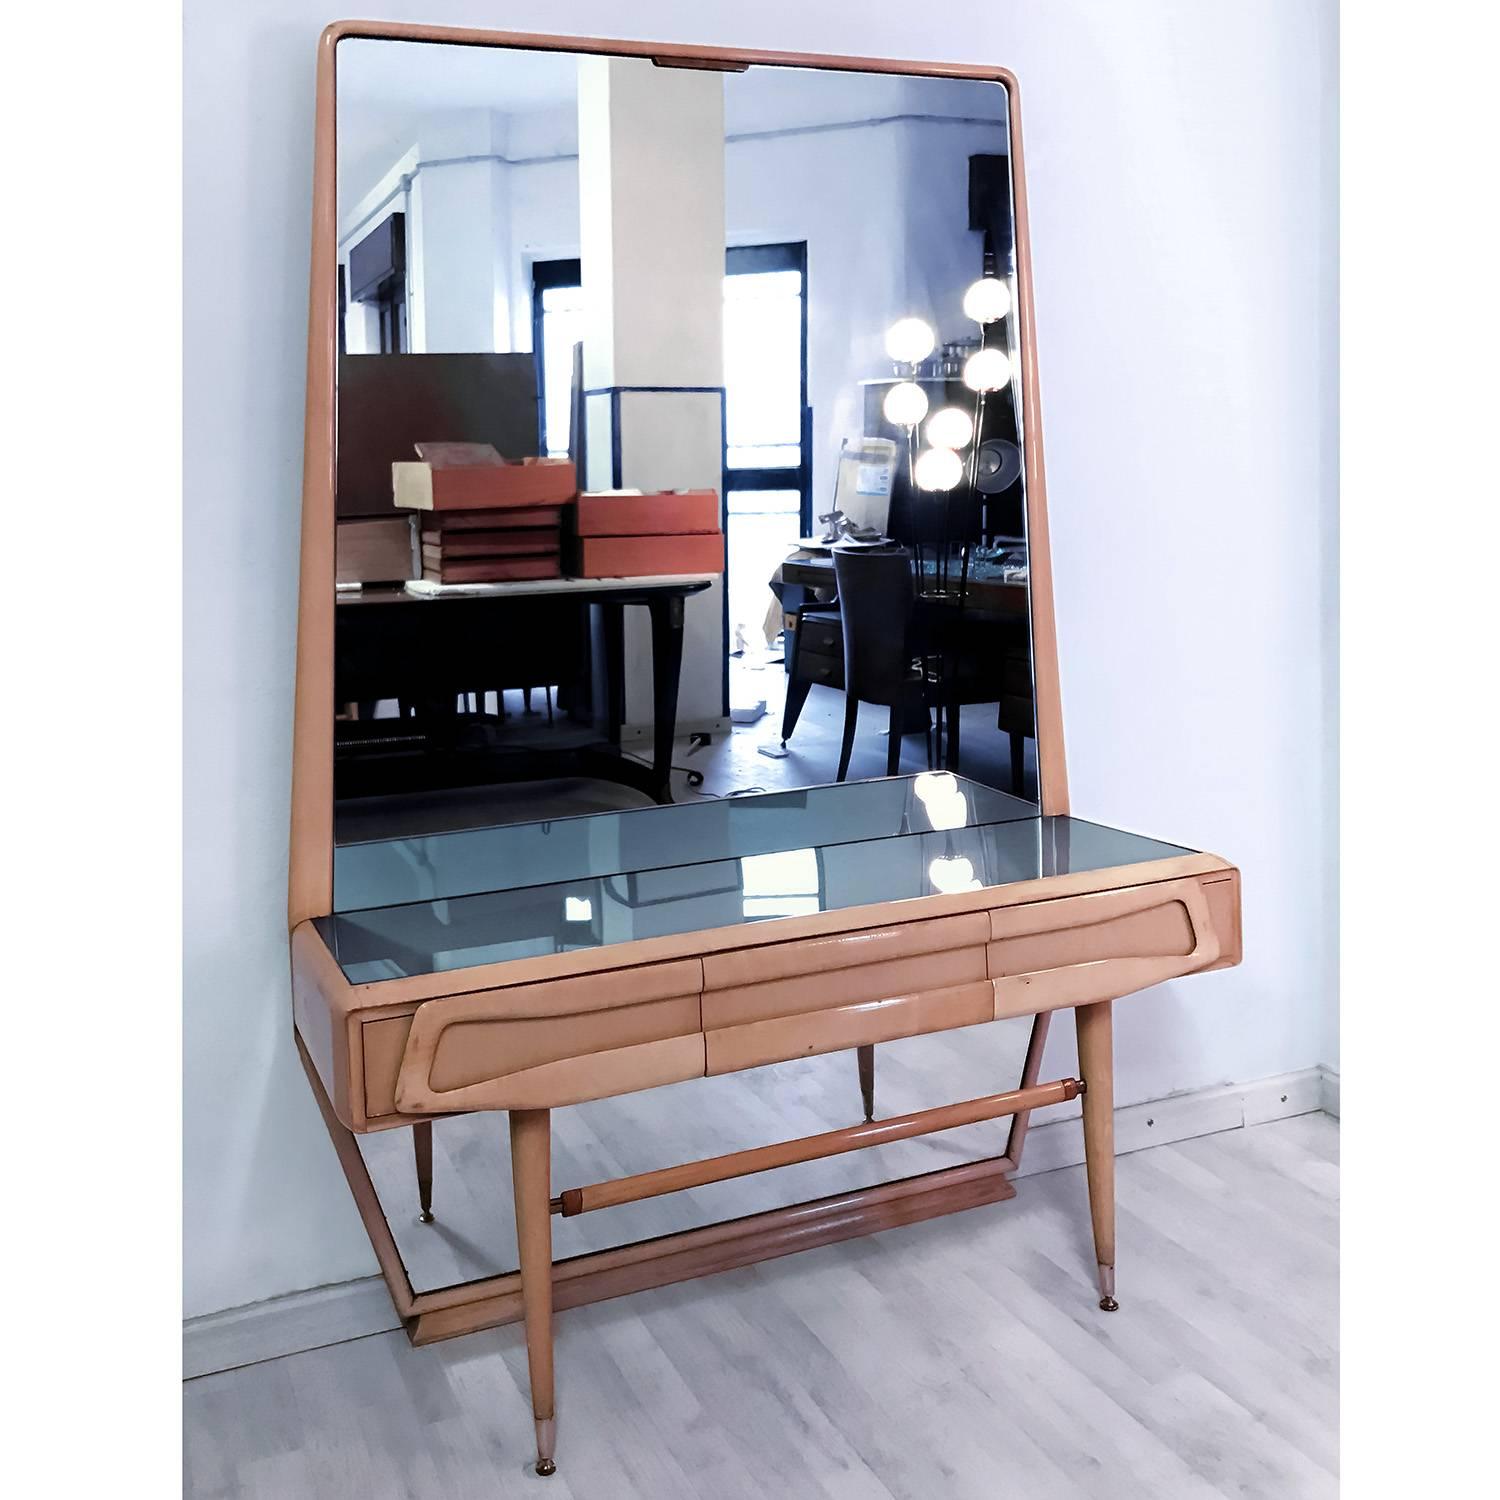 The design of this so amazing maple vanity dresser is attributed to Silvio Cavatorta in the 1950s, characterized by a catchy sculptural design with vertical mirror that has a special trapezoidal shape.

Its uniqueness is given also by the